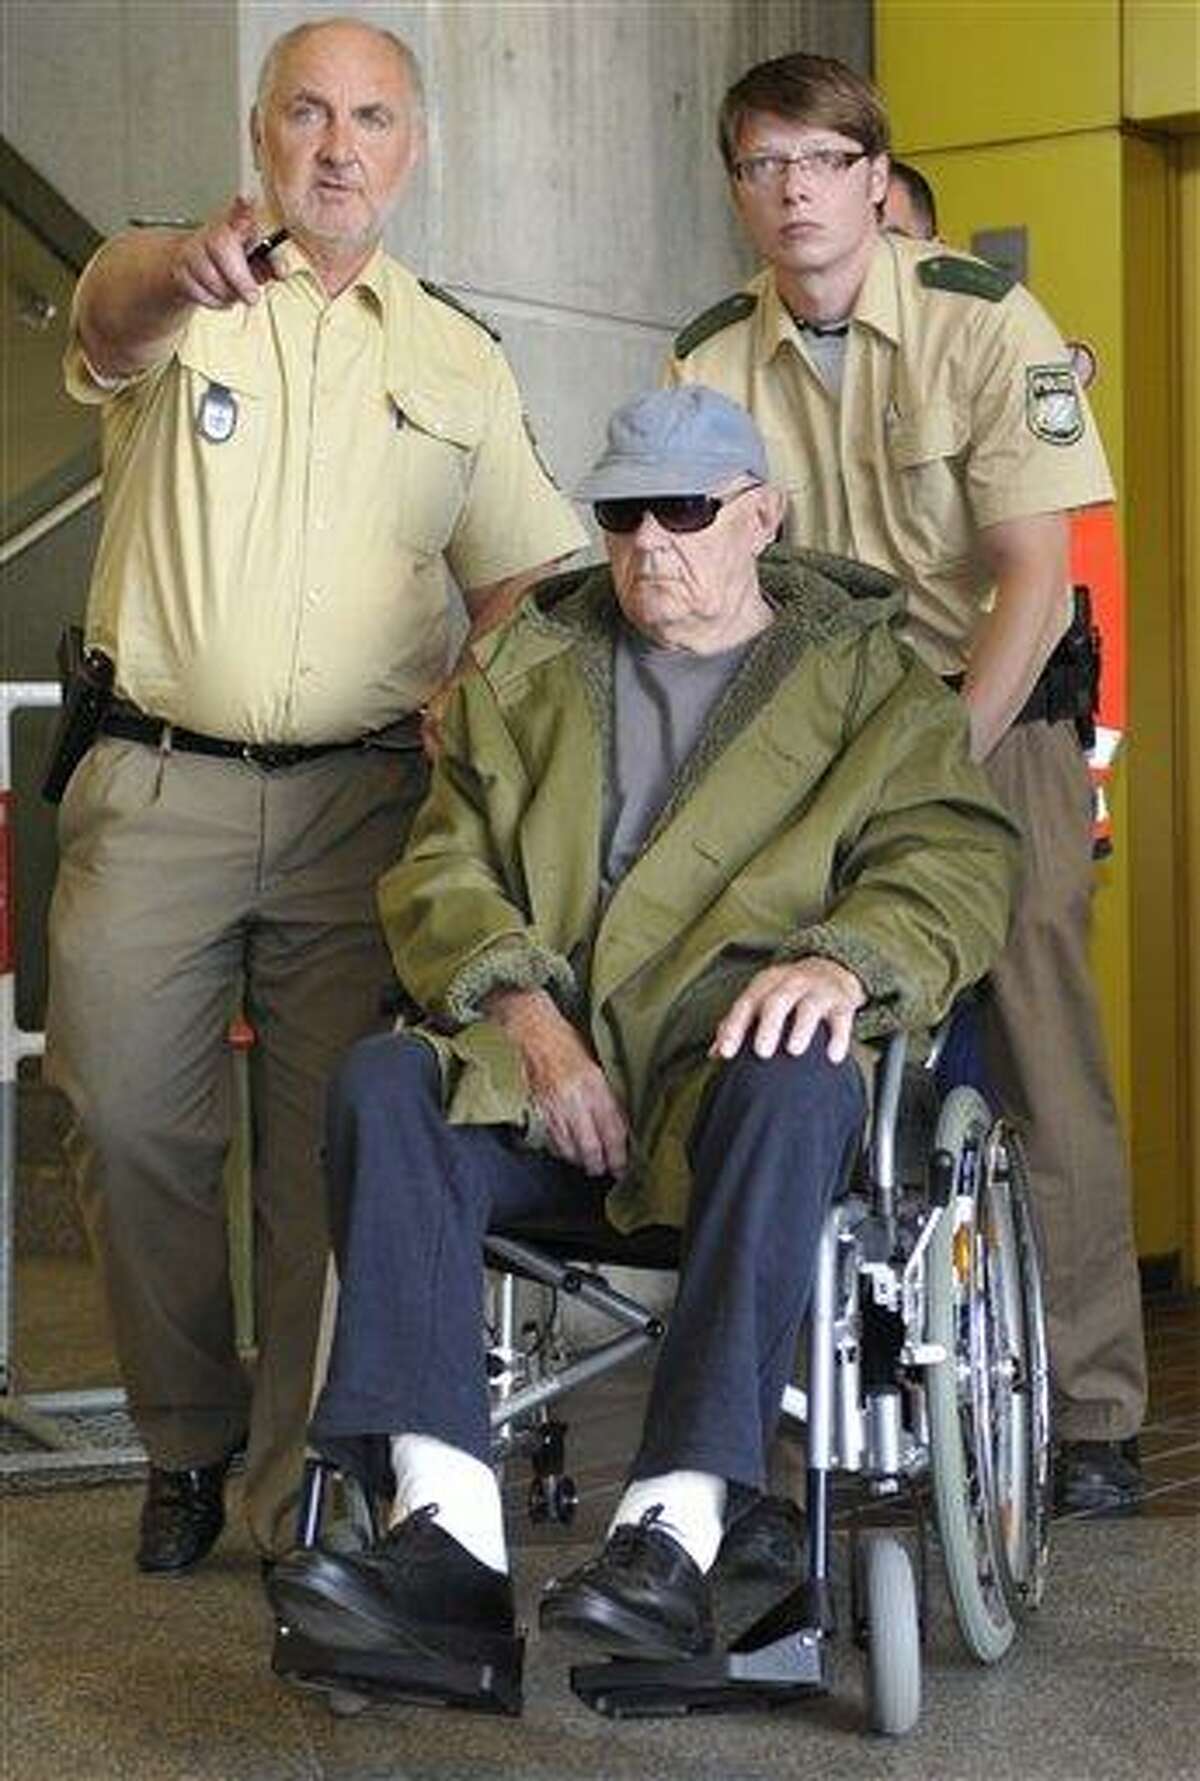 John Demjanjuk arrives in his wheelchair at the court building in Munich, southern Germany, on Tuesday, May 10, 2011. Ukrainian-born Demjanjuk, 90, is accused of 28,060 counts of accessory to murder for allegedly serving as a guard in the Nazis' Sobibor death camp. John Demjanjuk's attorney argued Tuesday that the German trial against his client lacks a legal basis because the Sobibor camp lies in neighboring Poland. (AP Photo/dapd, Uwe Lein)